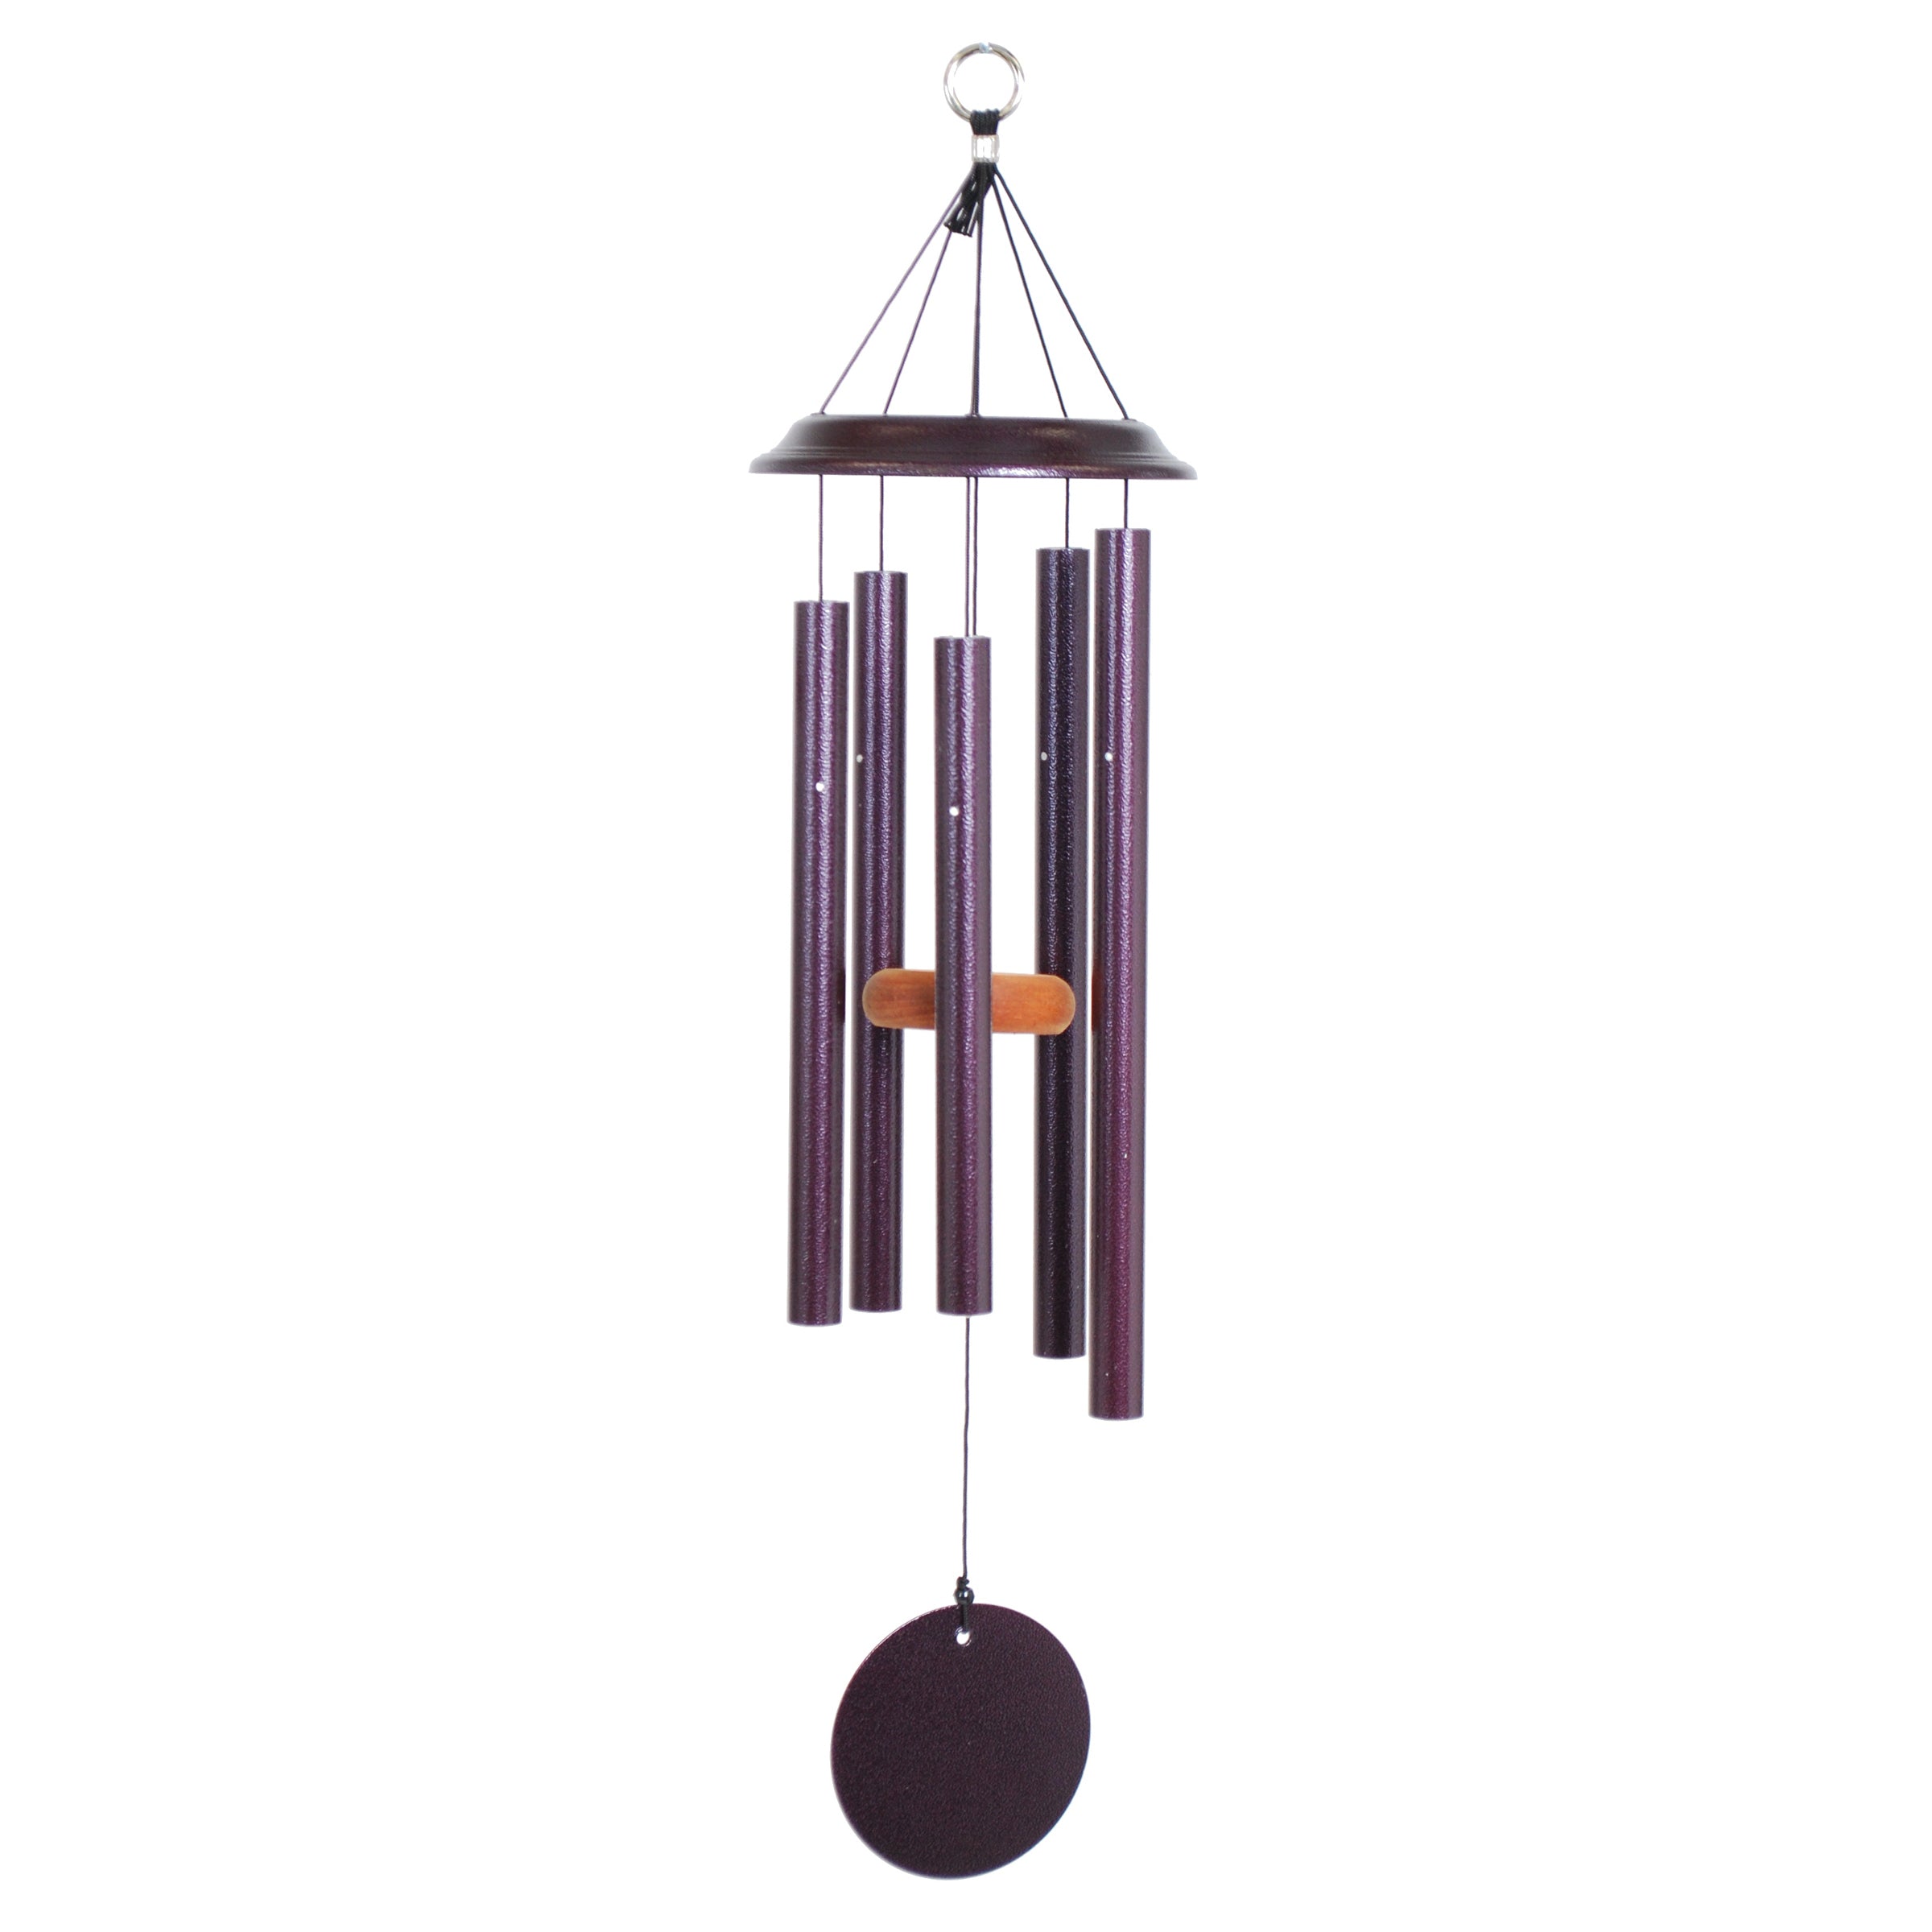 Wind River Shenandoah Melodies® 35 inch wind chimes